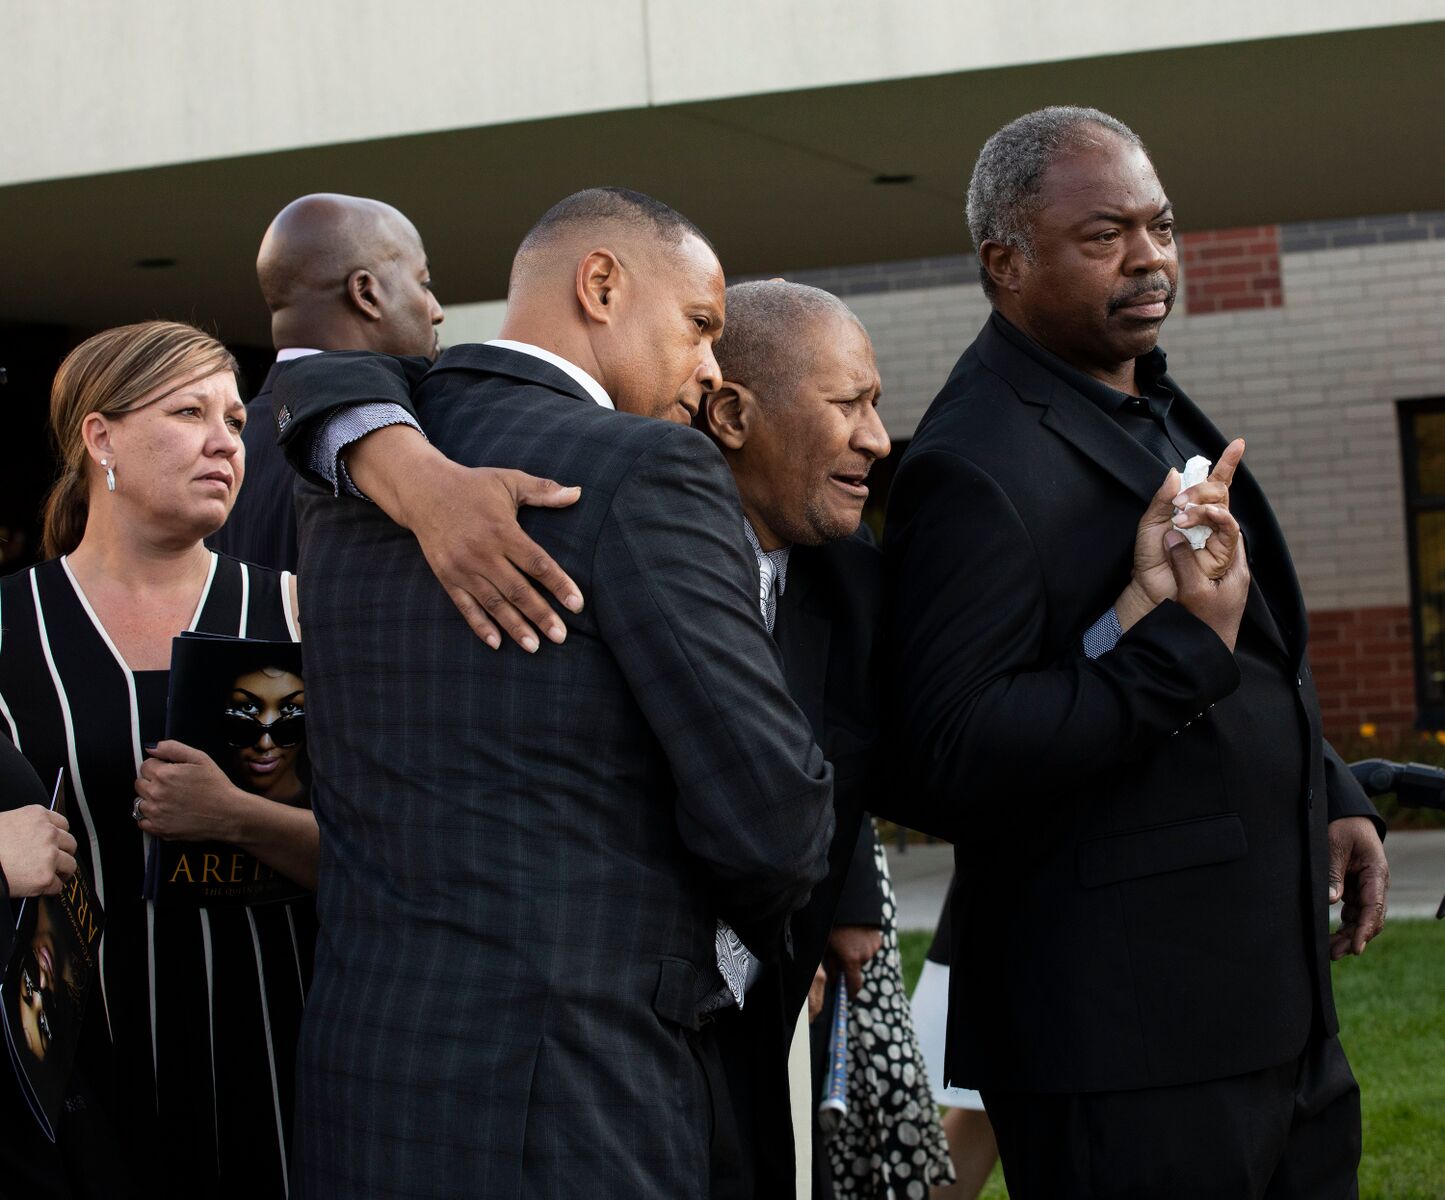 Aretha Franklin's family at her funeral | Source: Getty Images